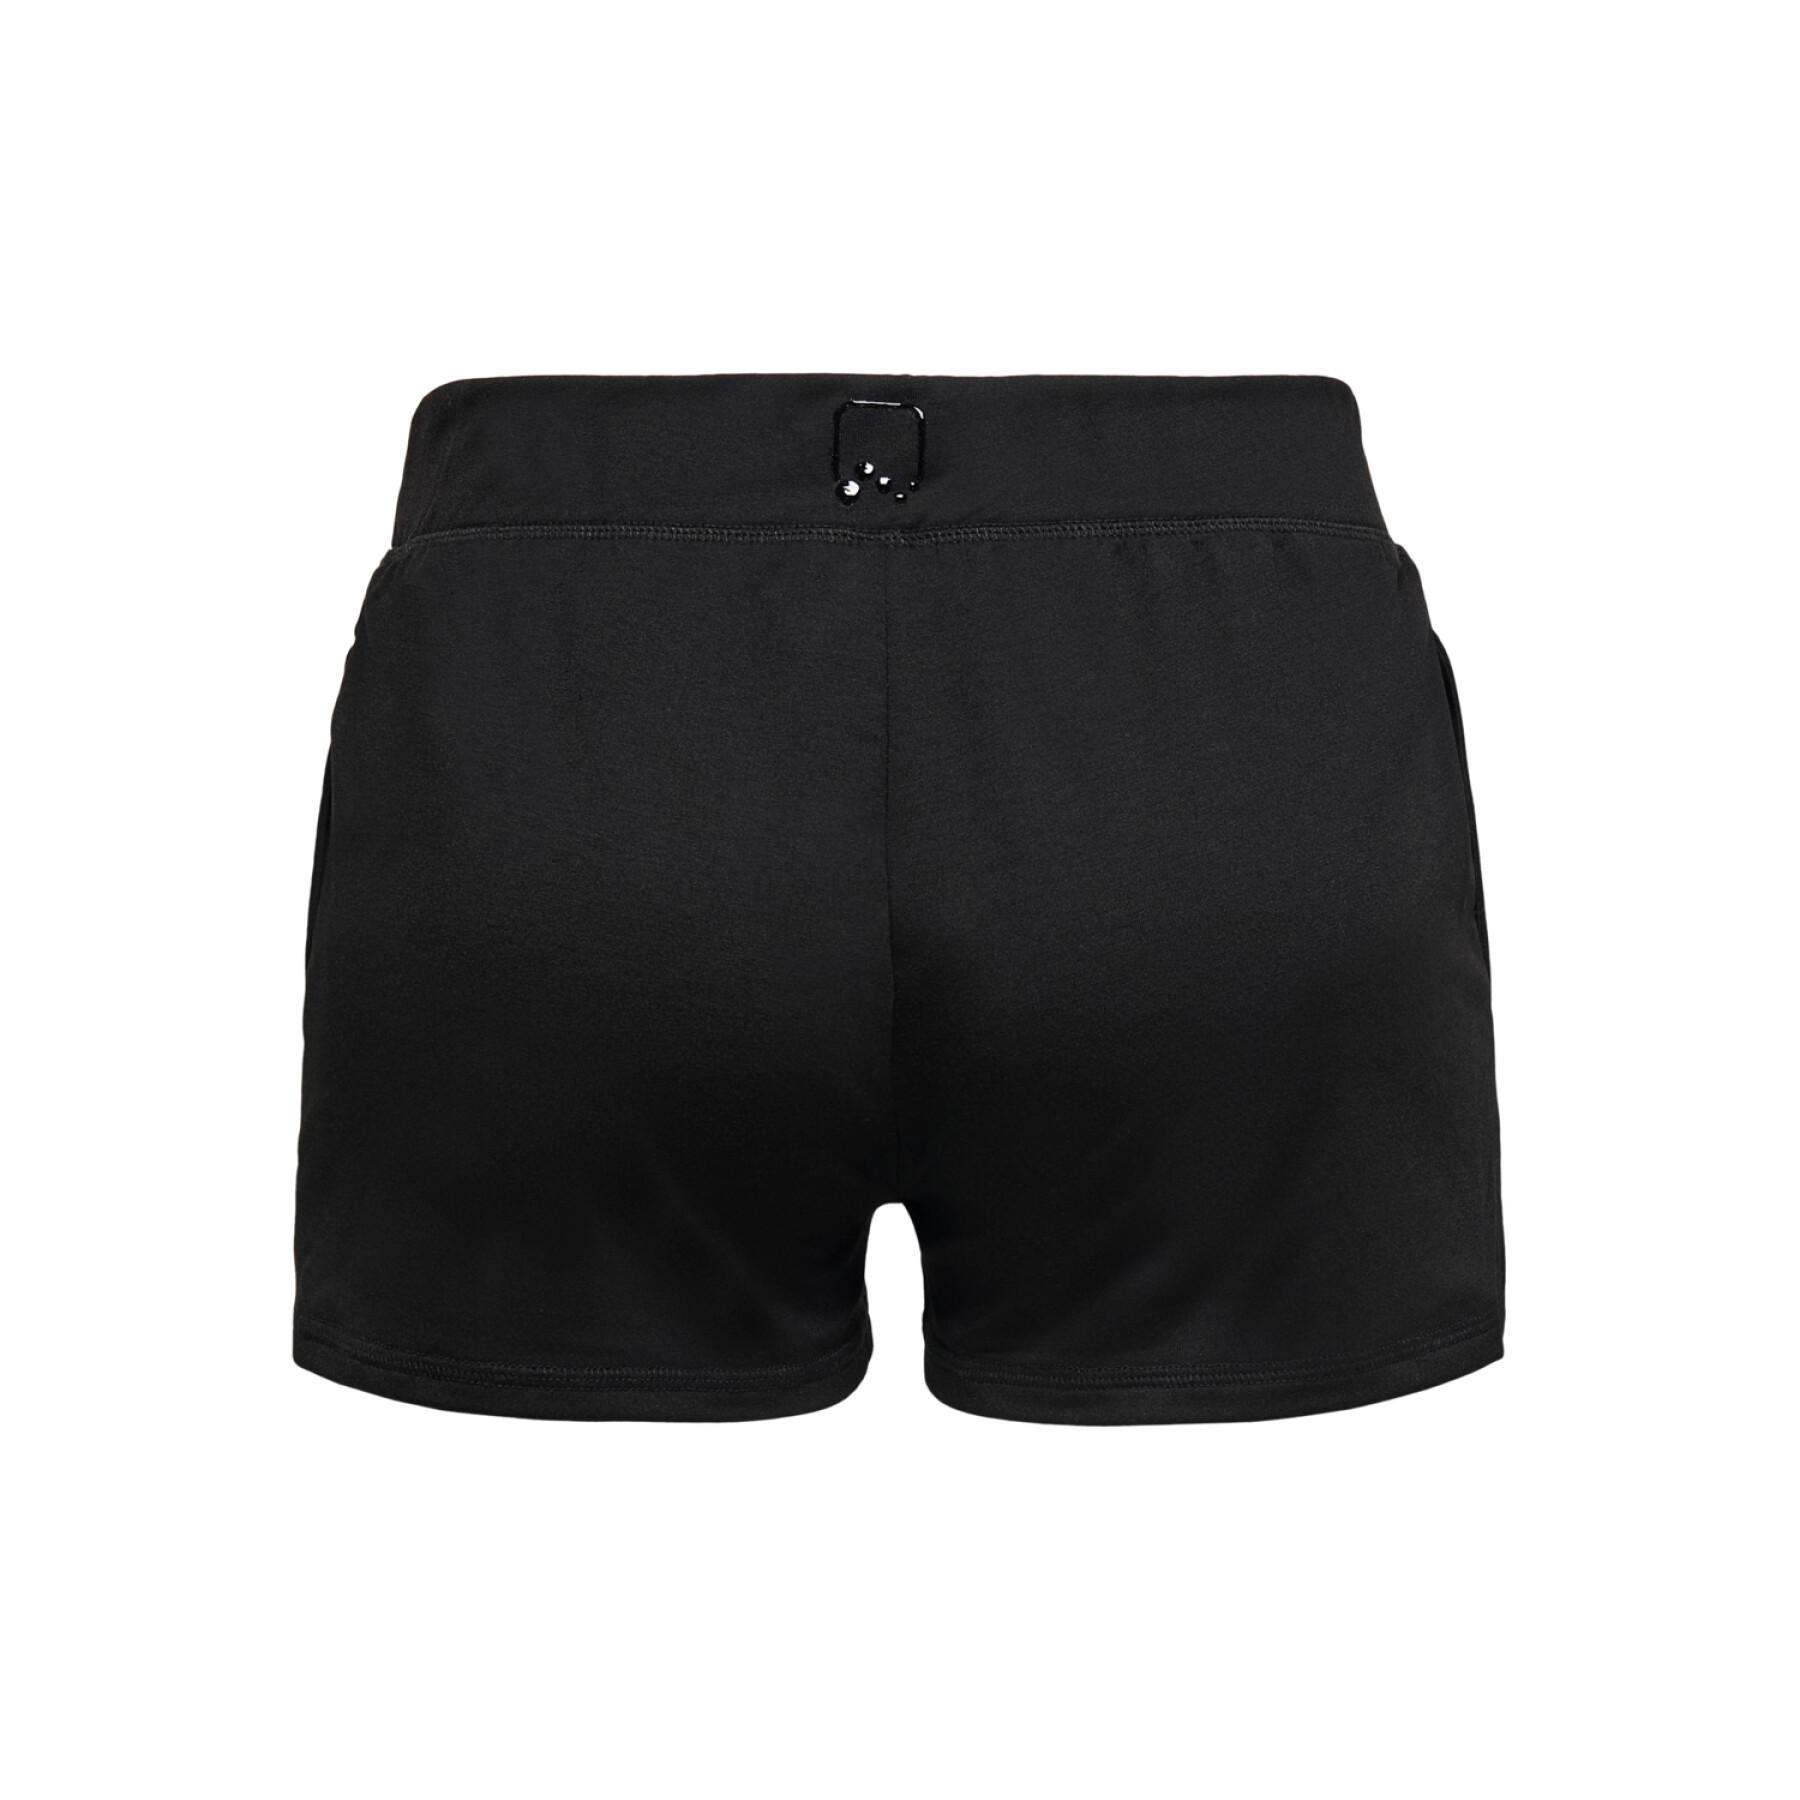 Women's shorts Only play onpayna